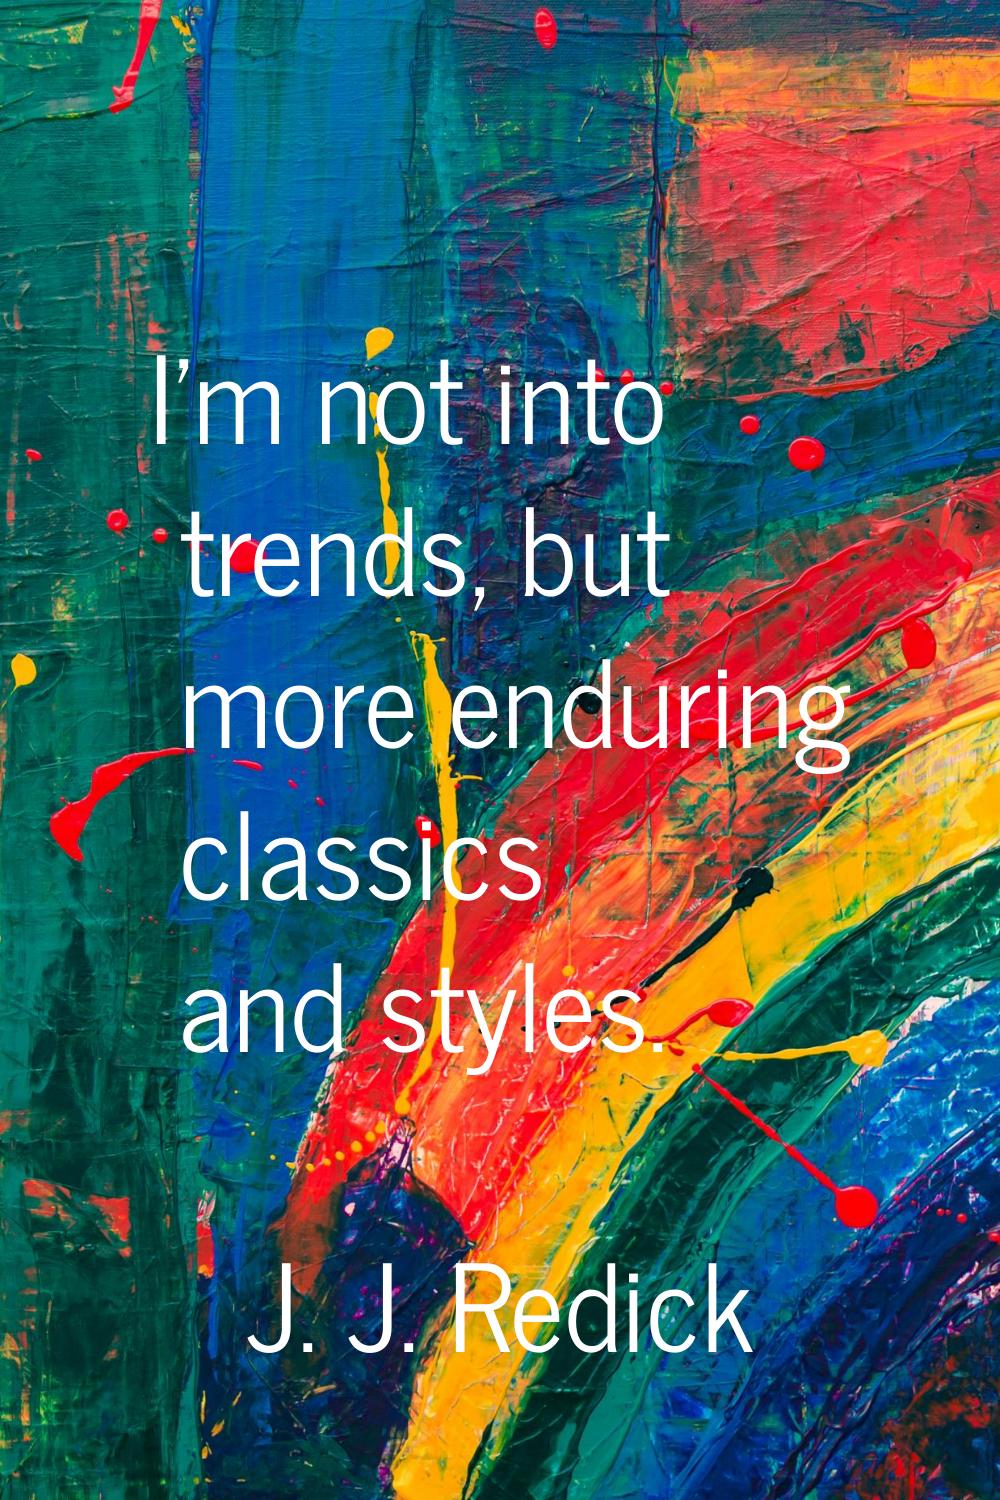 I'm not into trends, but more enduring classics and styles.